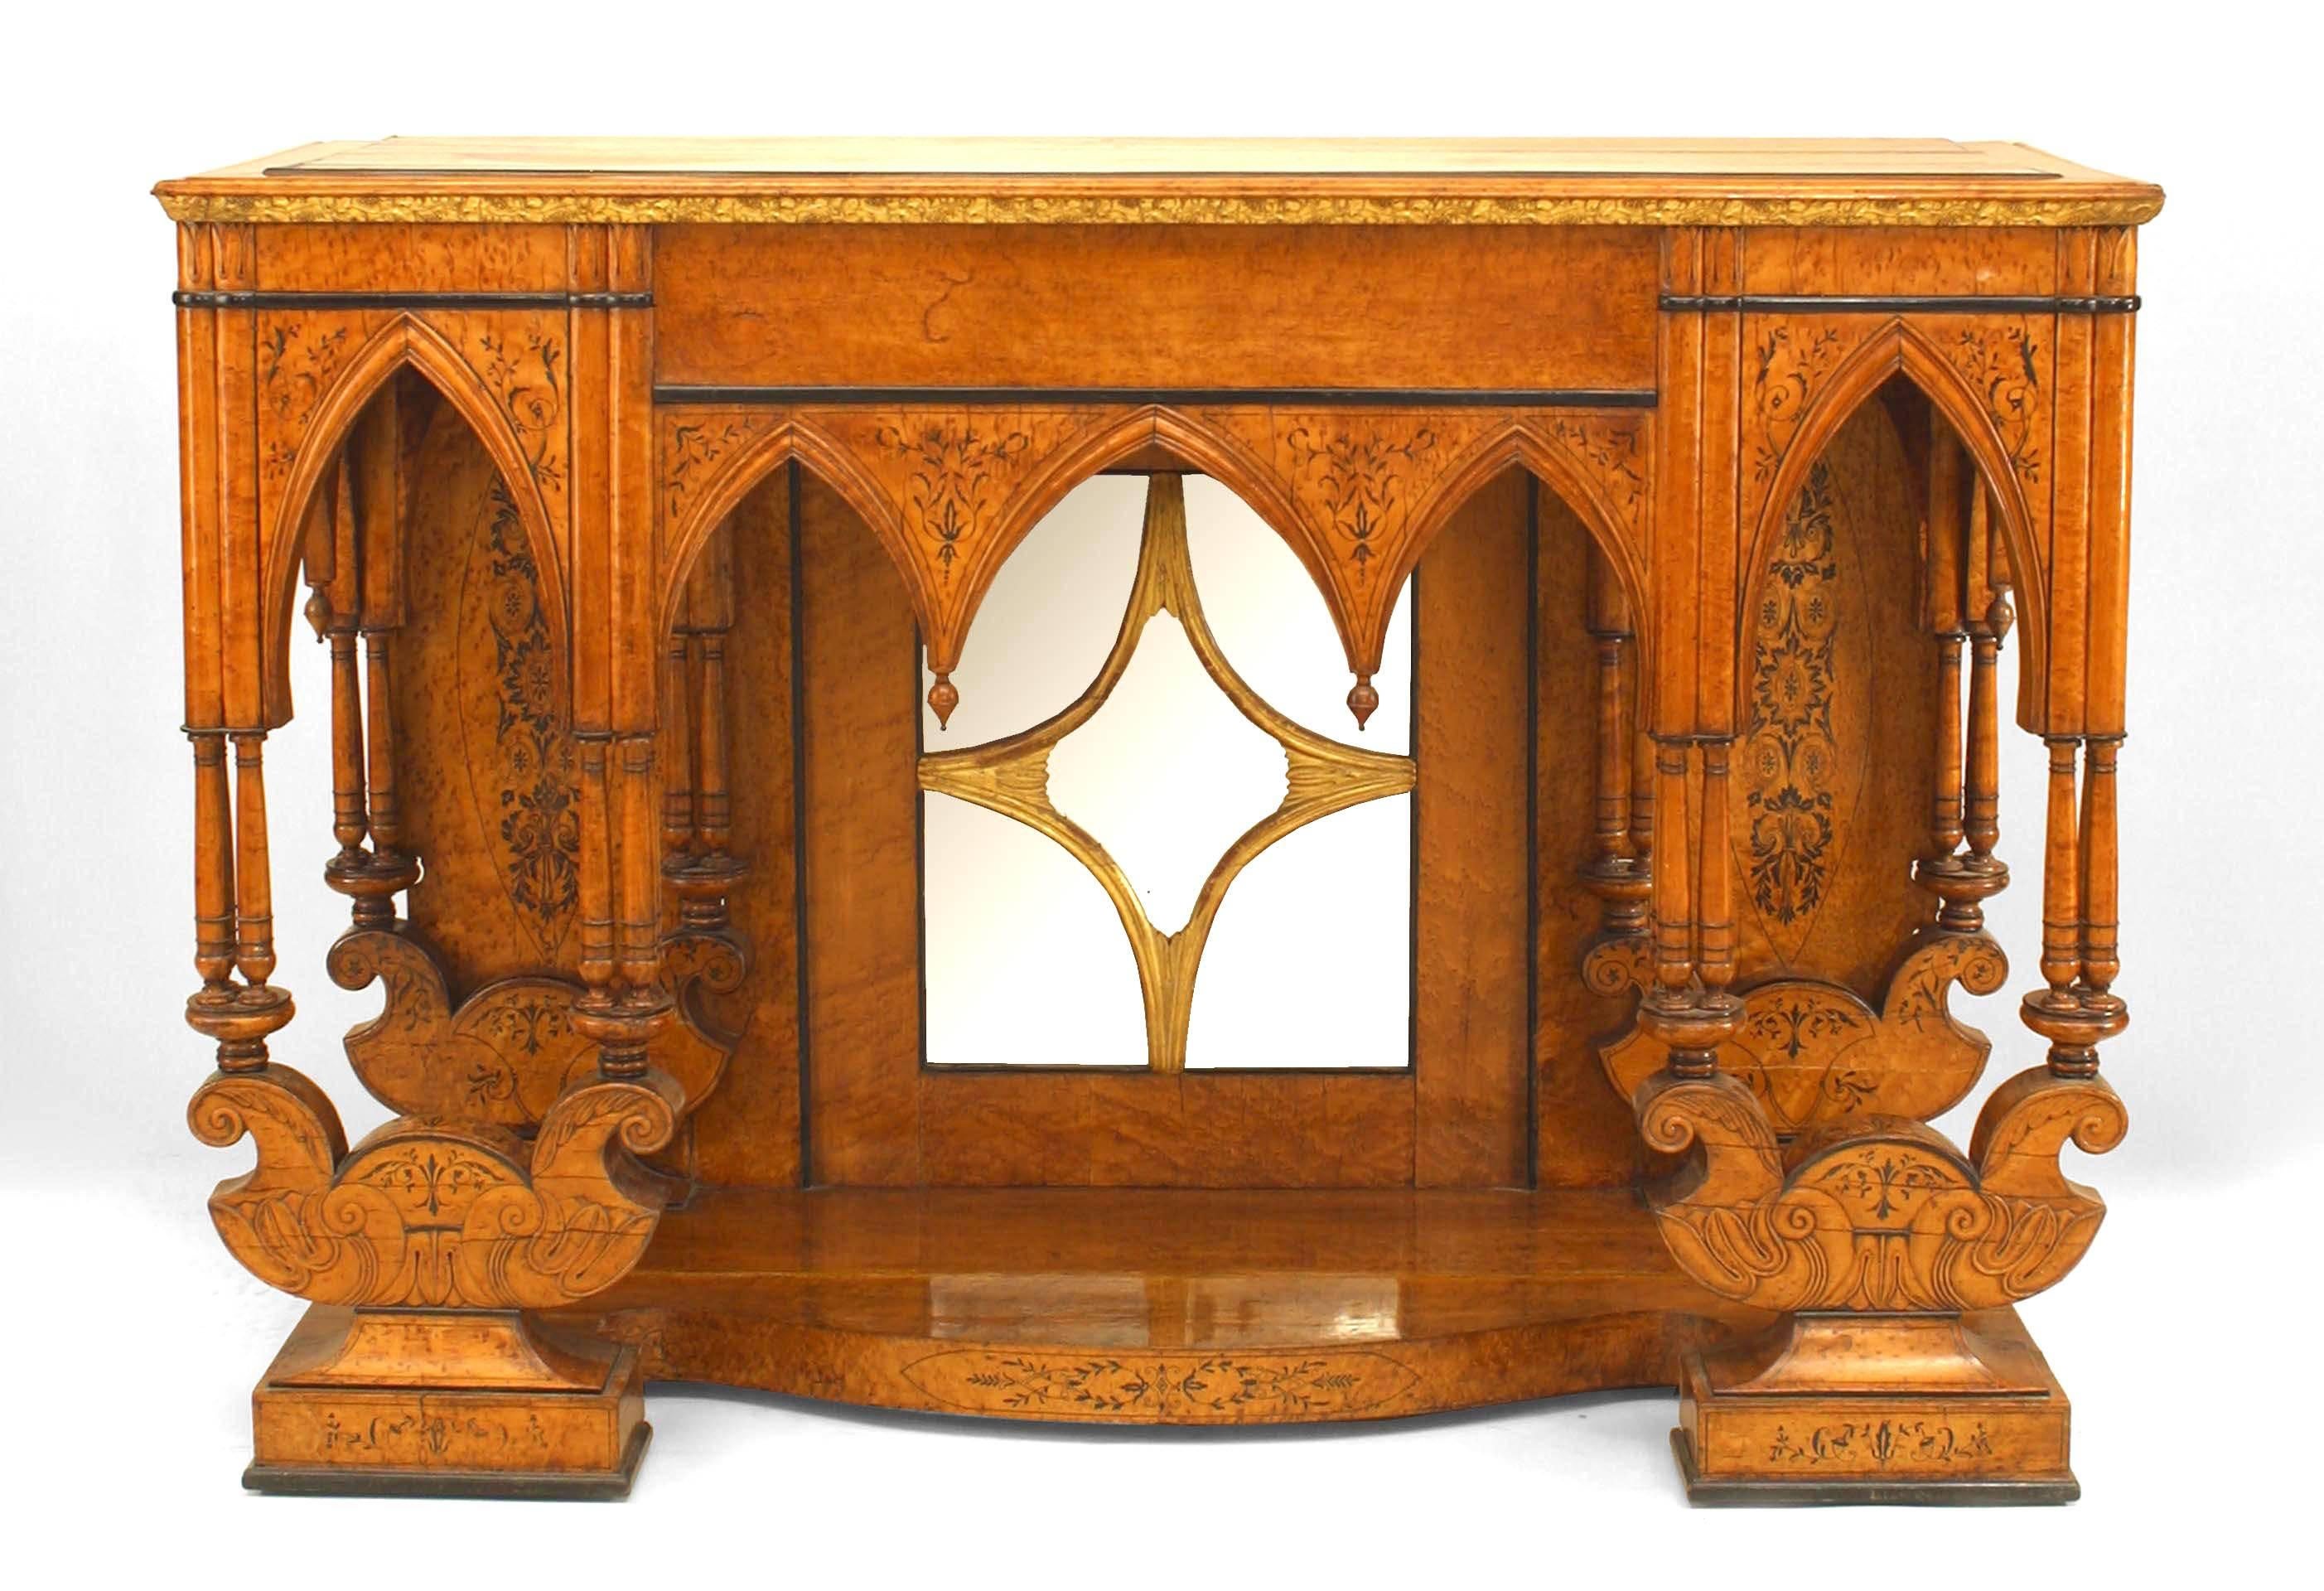 French Charles X birds eye maple and ebonized trim and inlaid Gothic design console table with platform base and mirrored back with gilt floral carved edge on top.
 